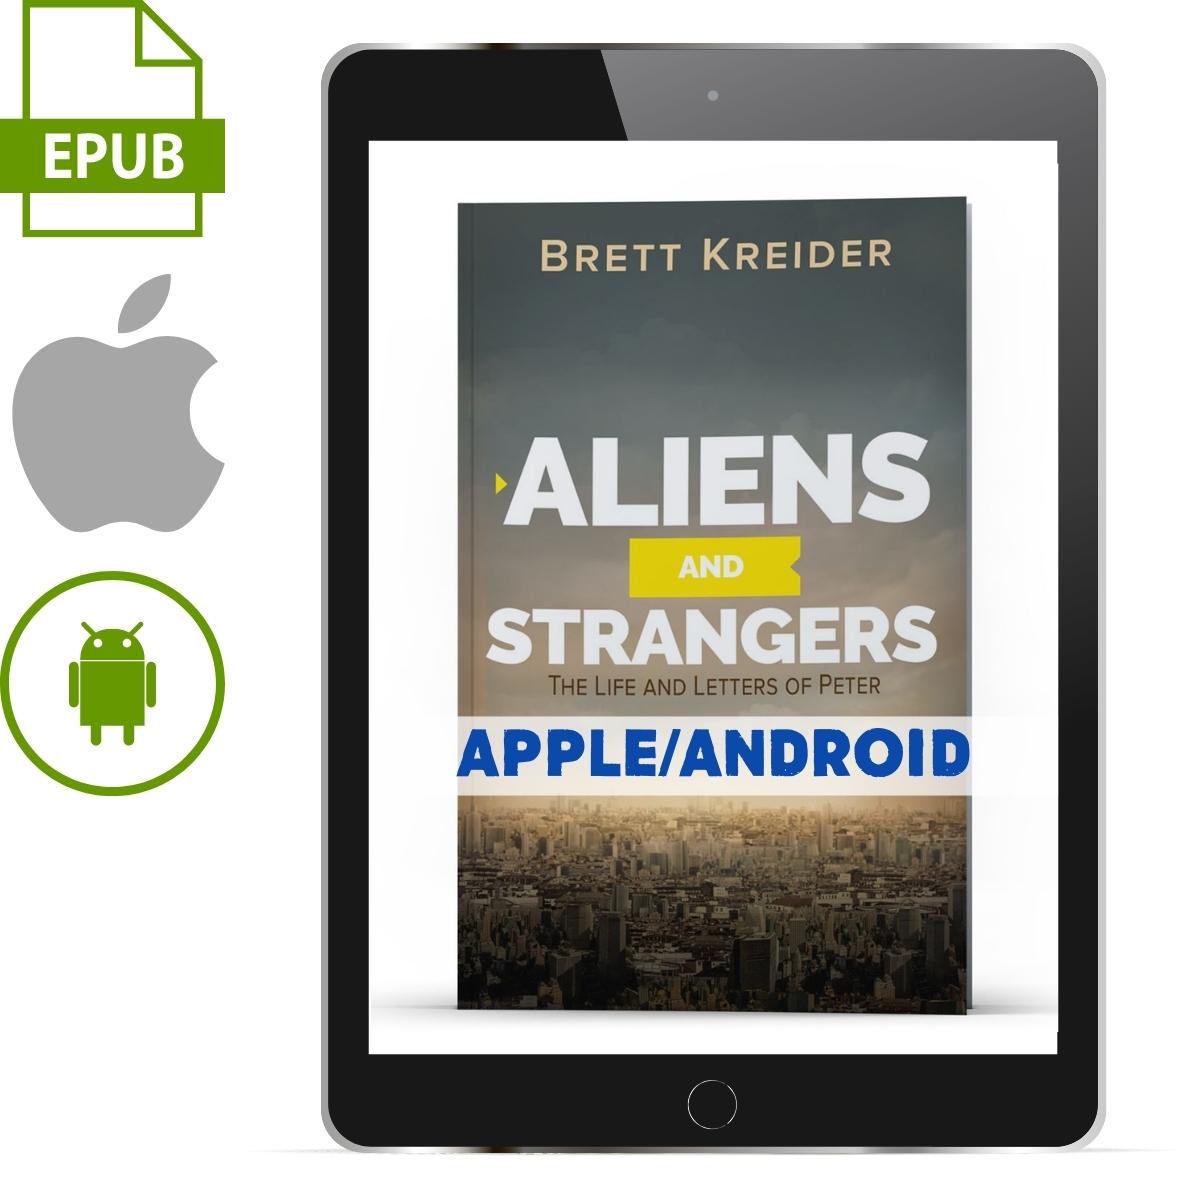 Aliens and Strangers (Apple/Android Versions) - Illumination Publishers